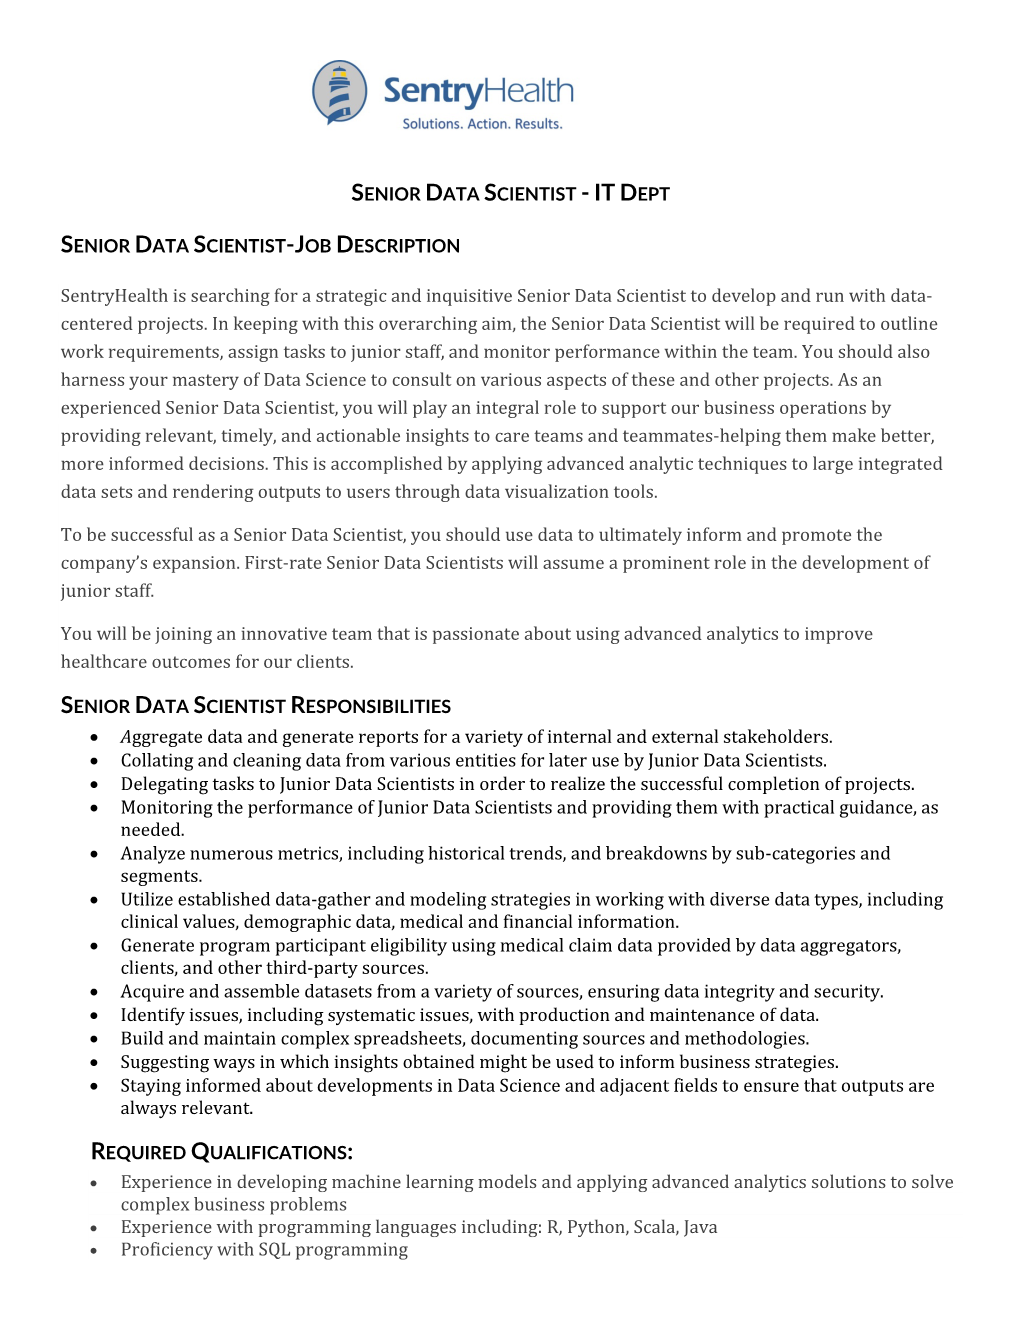 Sentryhealth Is Searching for a Strategic and Inquisitive Senior Data Scientist to Develop and Run with Data- Centered Projects